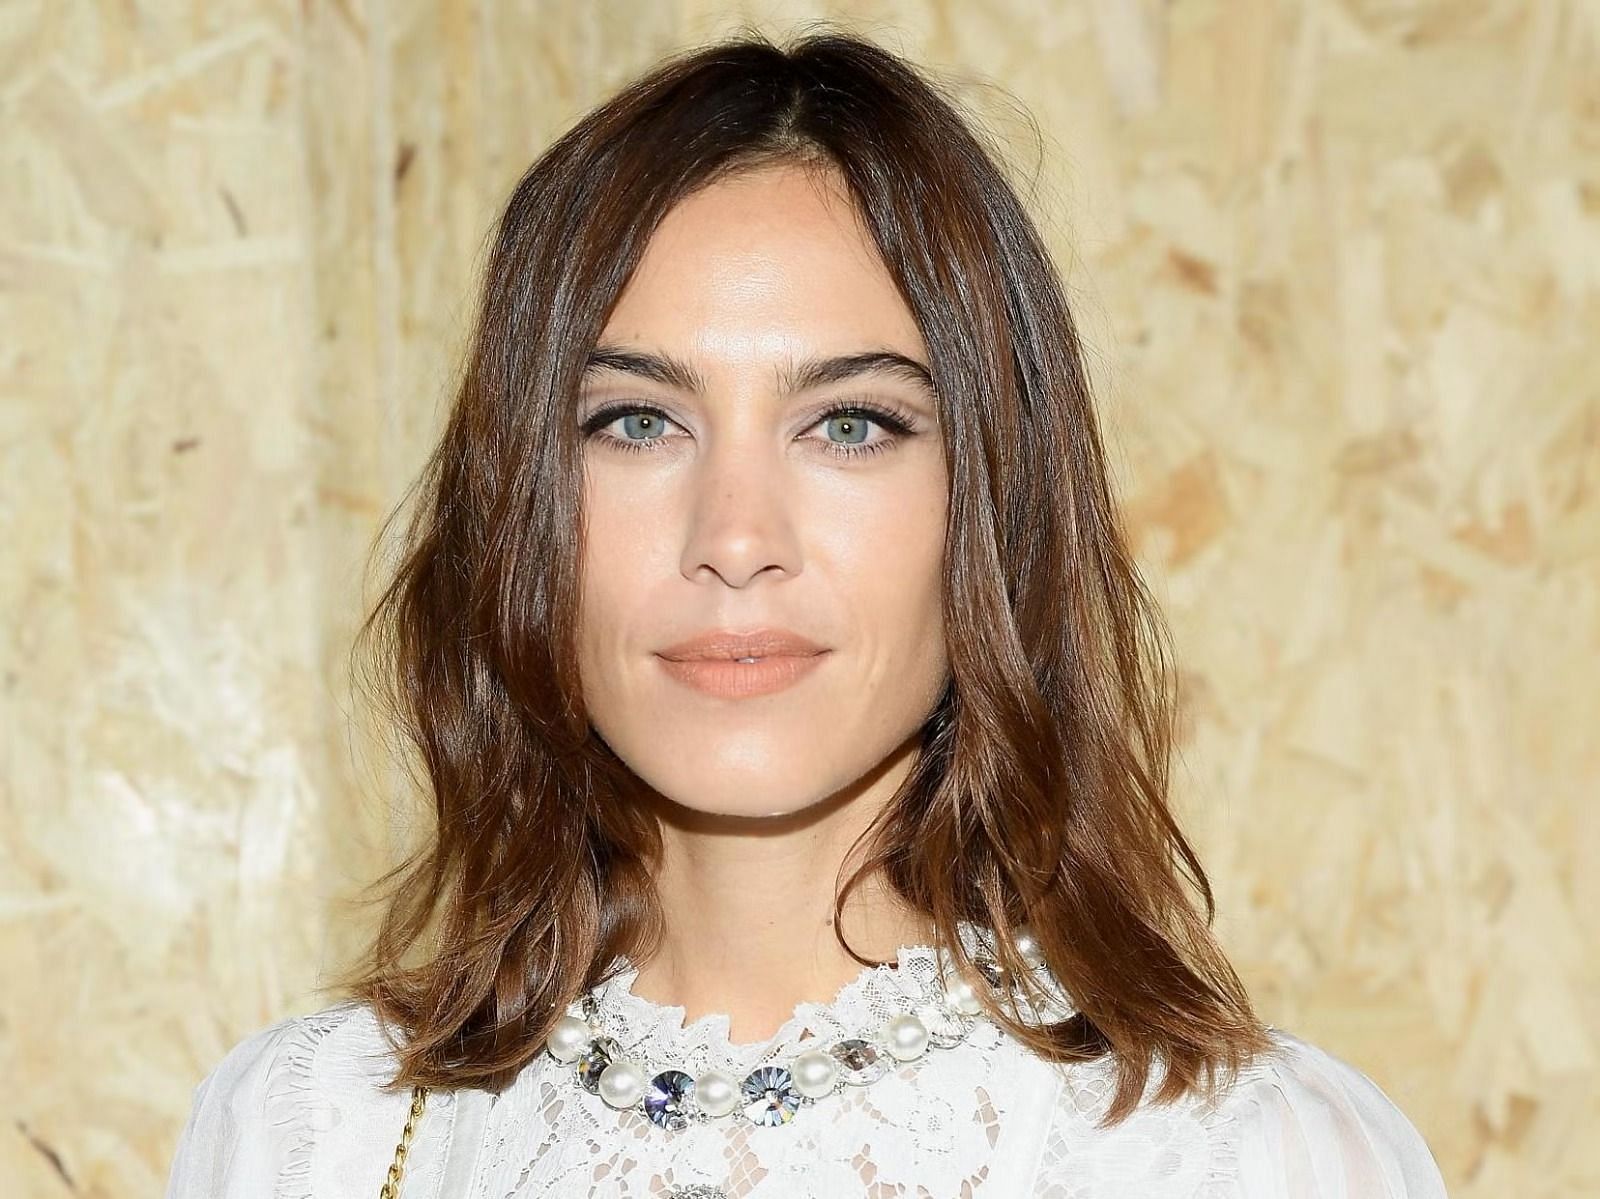 Alexa Chung in celebrities with cold sores (Image via Getty Images)